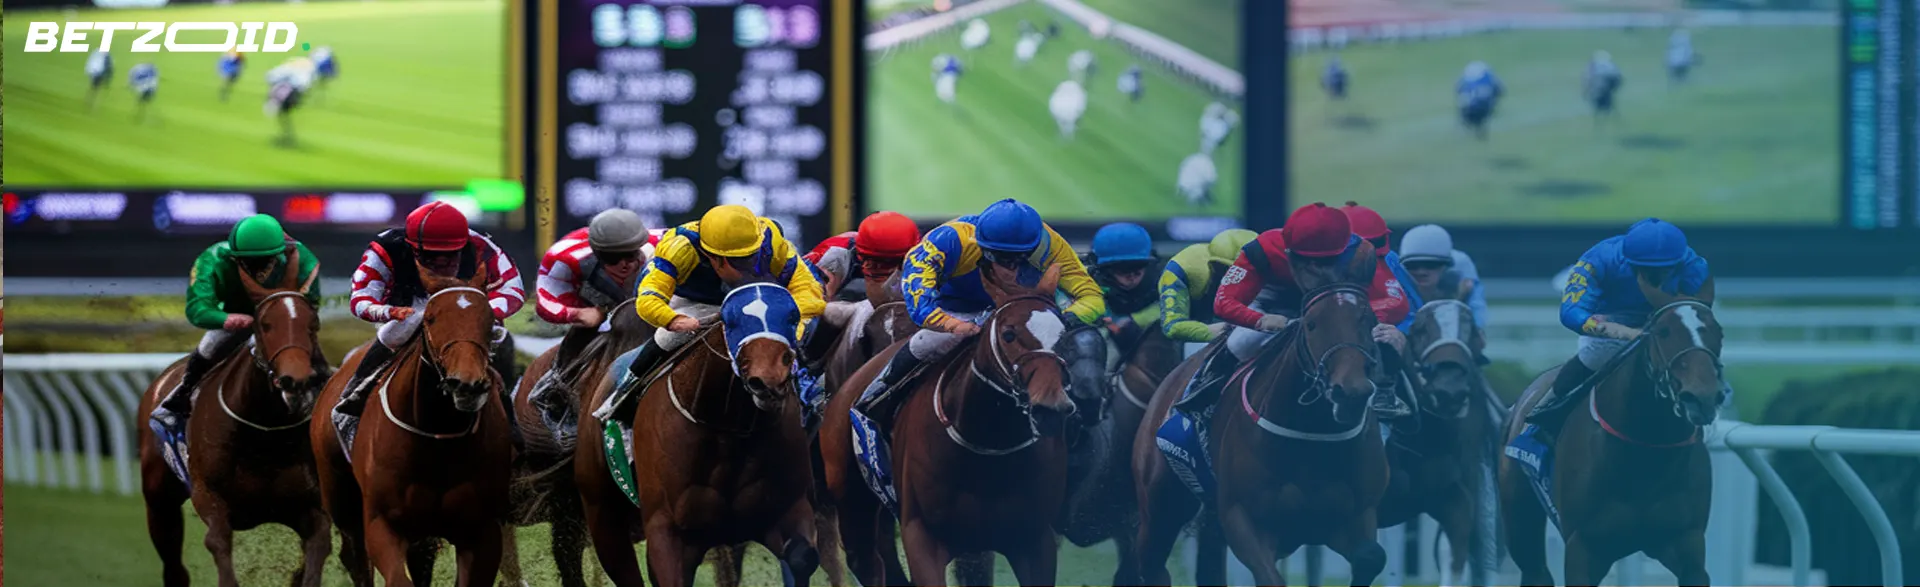 Jockeys racing on horses with large screens in the background, illustrating the betting opportunities provided by offshore sportsbooks.